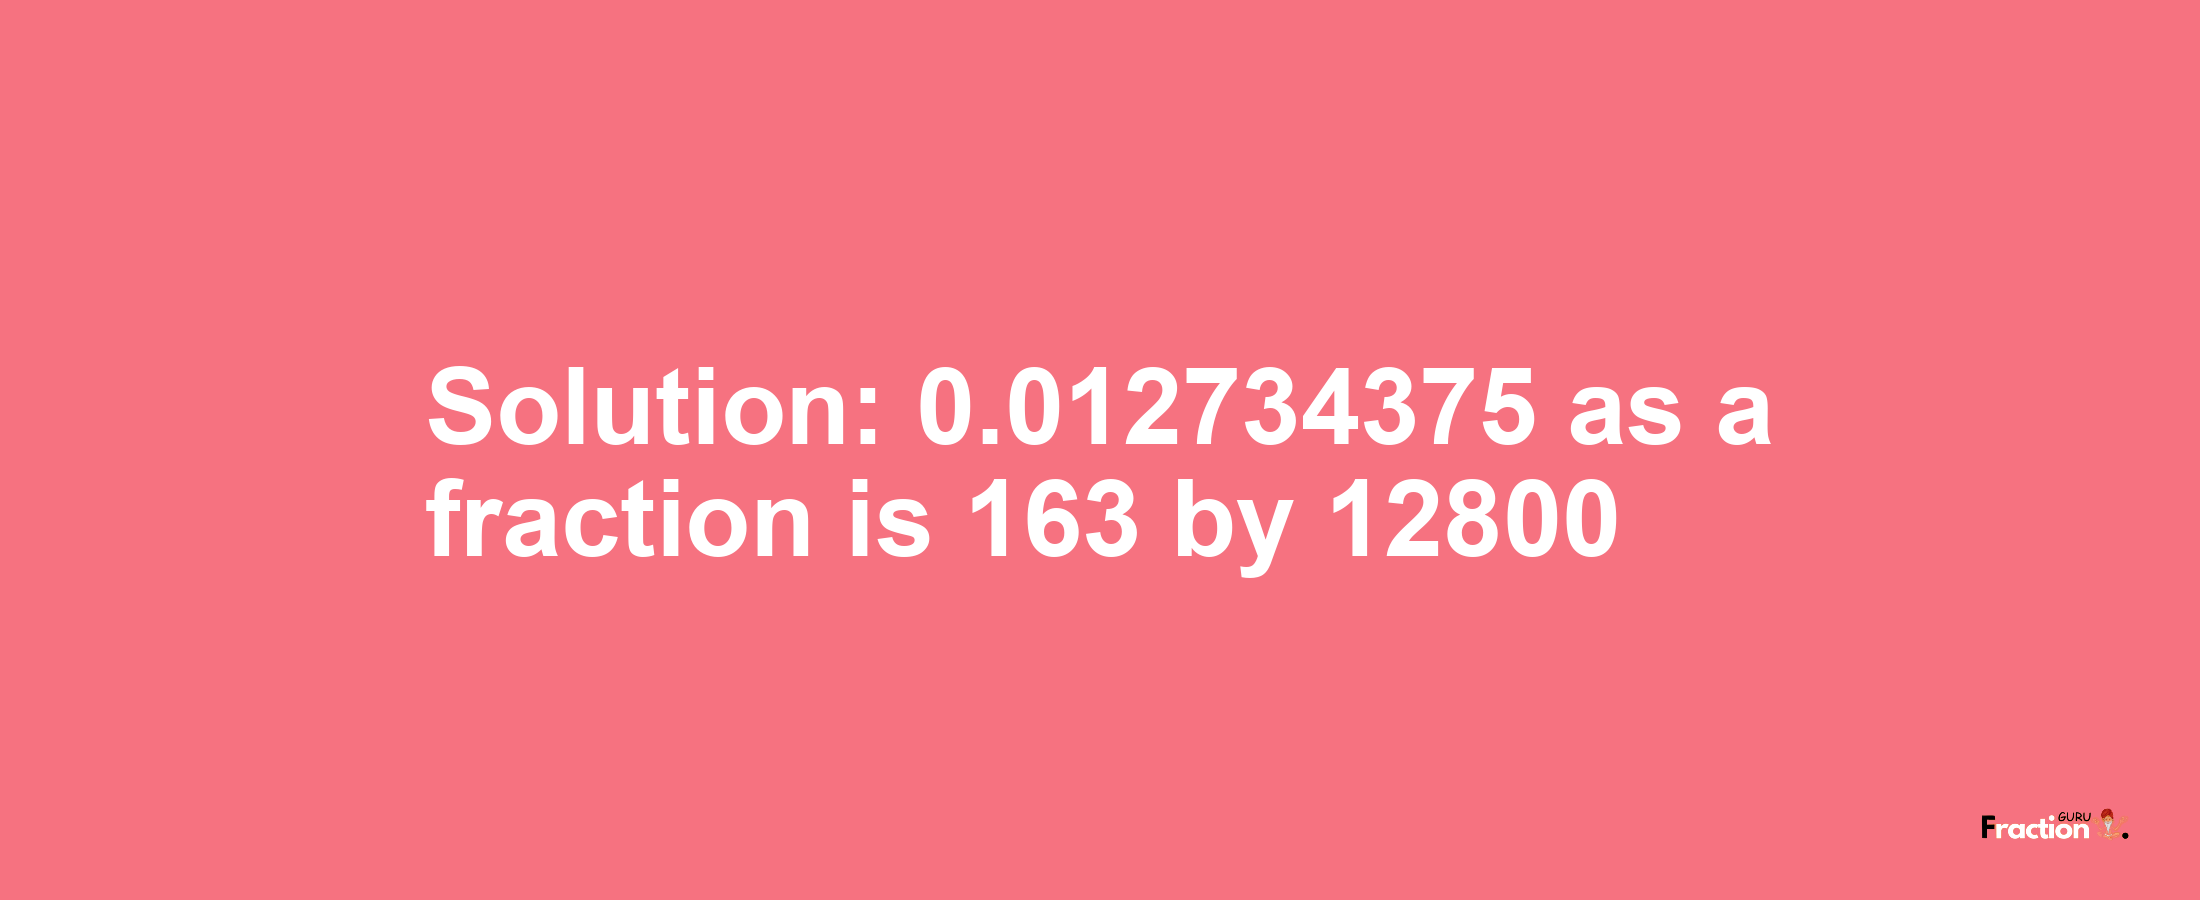 Solution:0.012734375 as a fraction is 163/12800